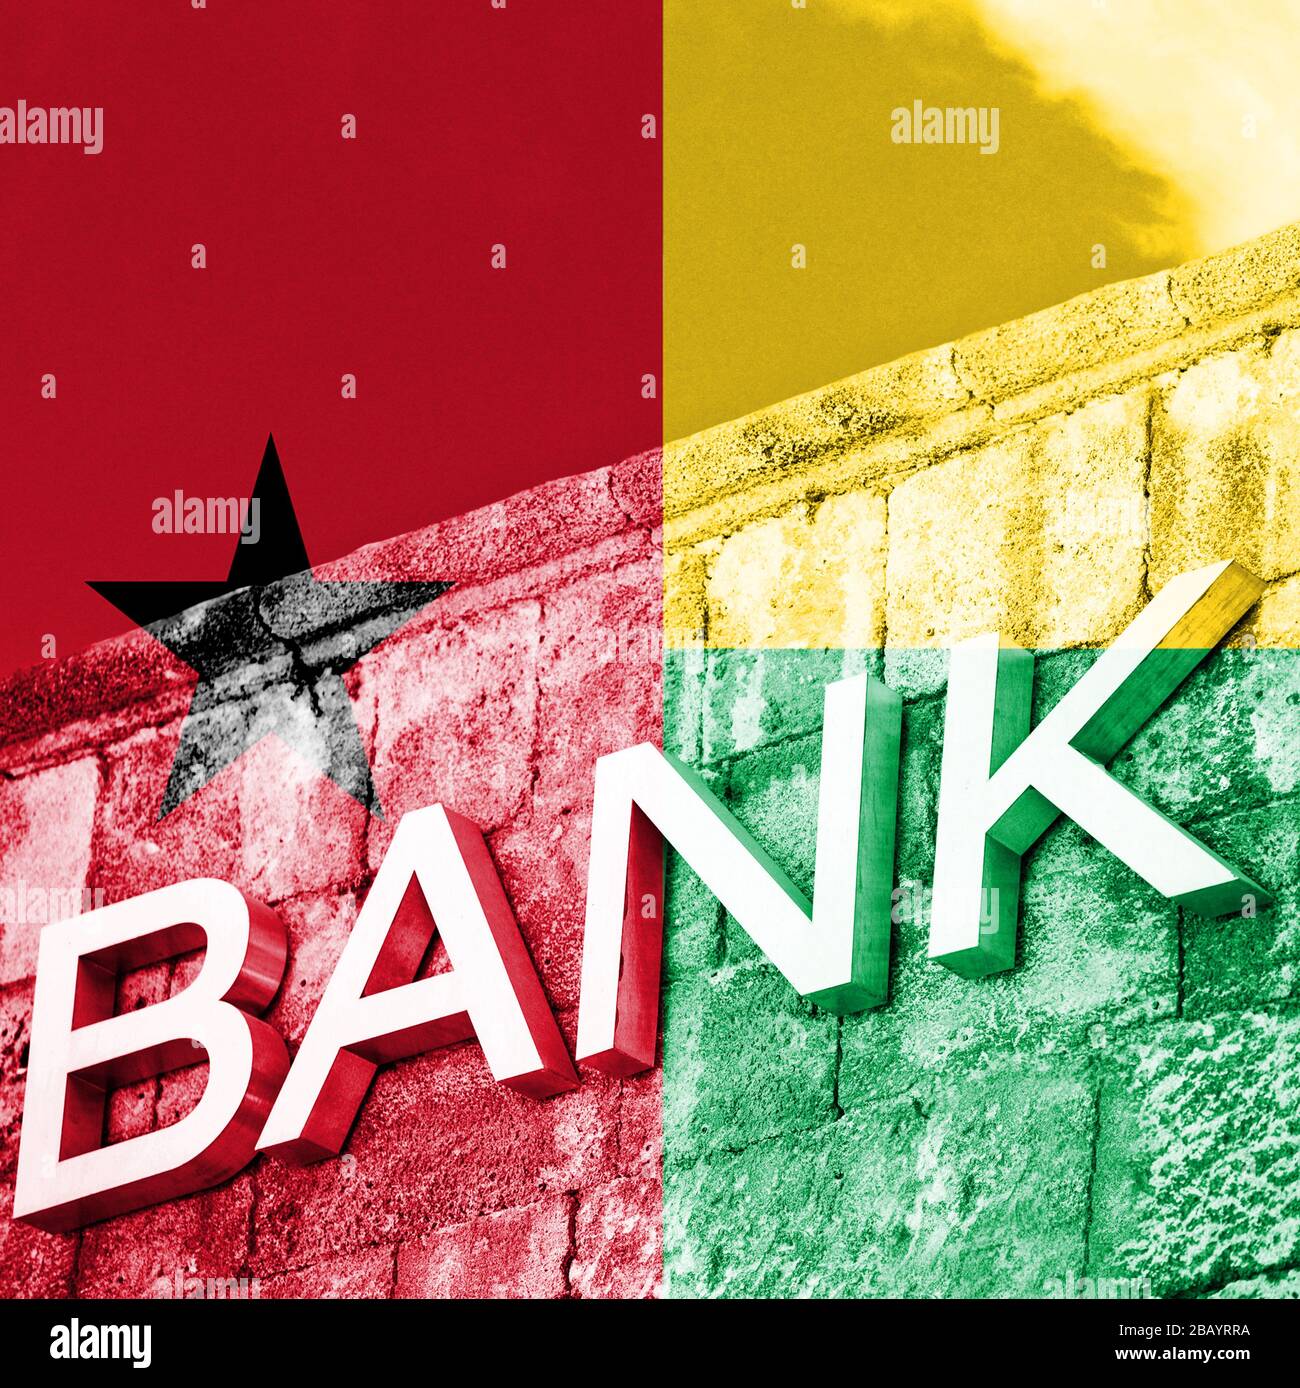 Finance and economy concept of bank with flag of Guinea Bissau Stock Photo